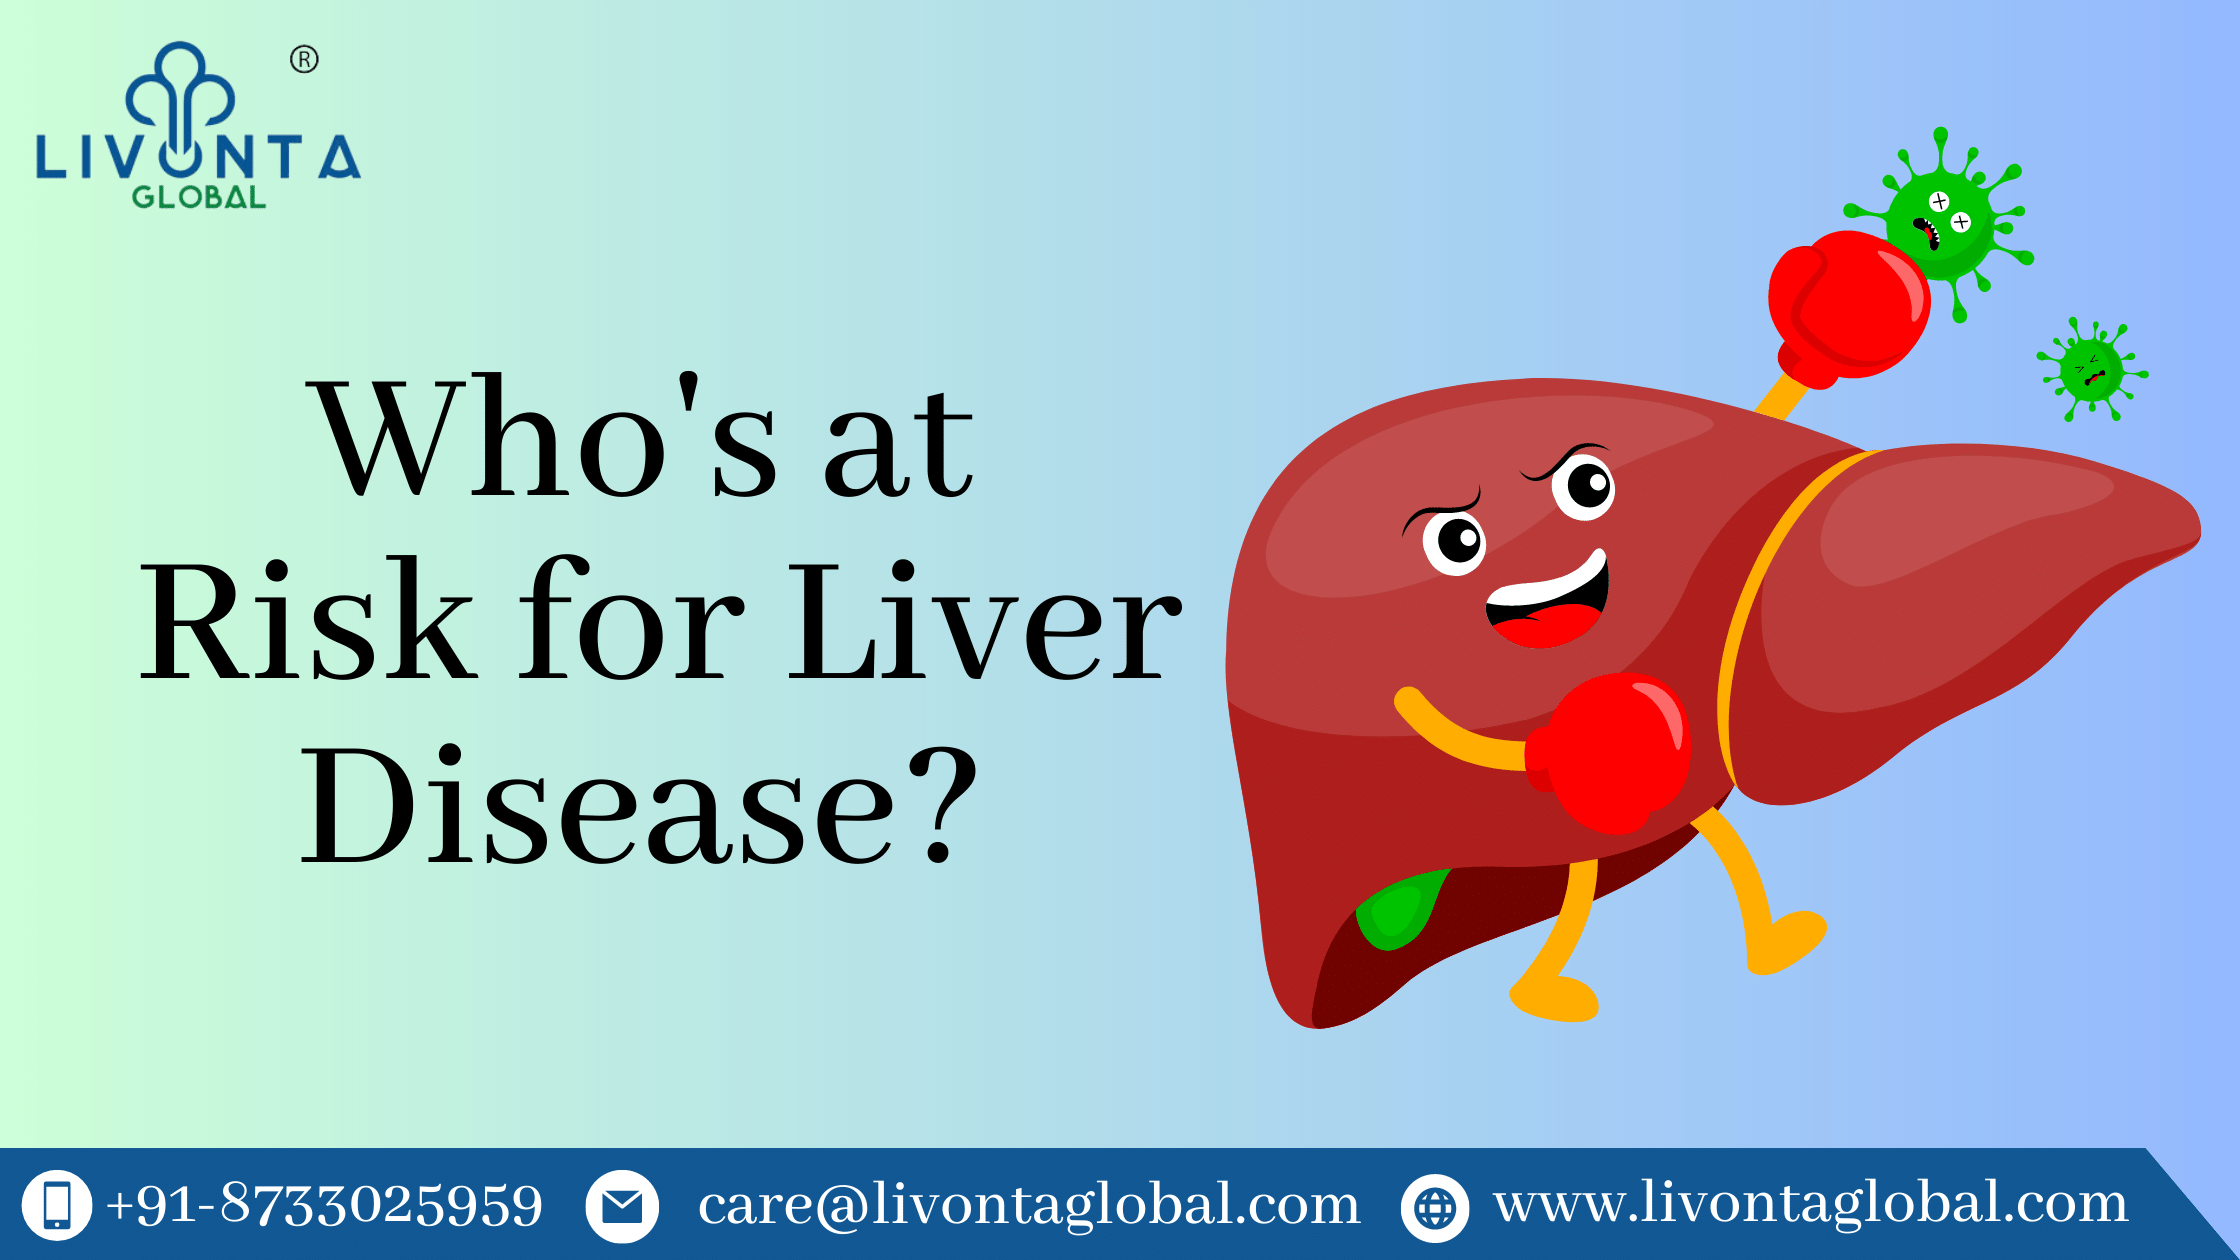 Who's at Risk for Liver Disease?